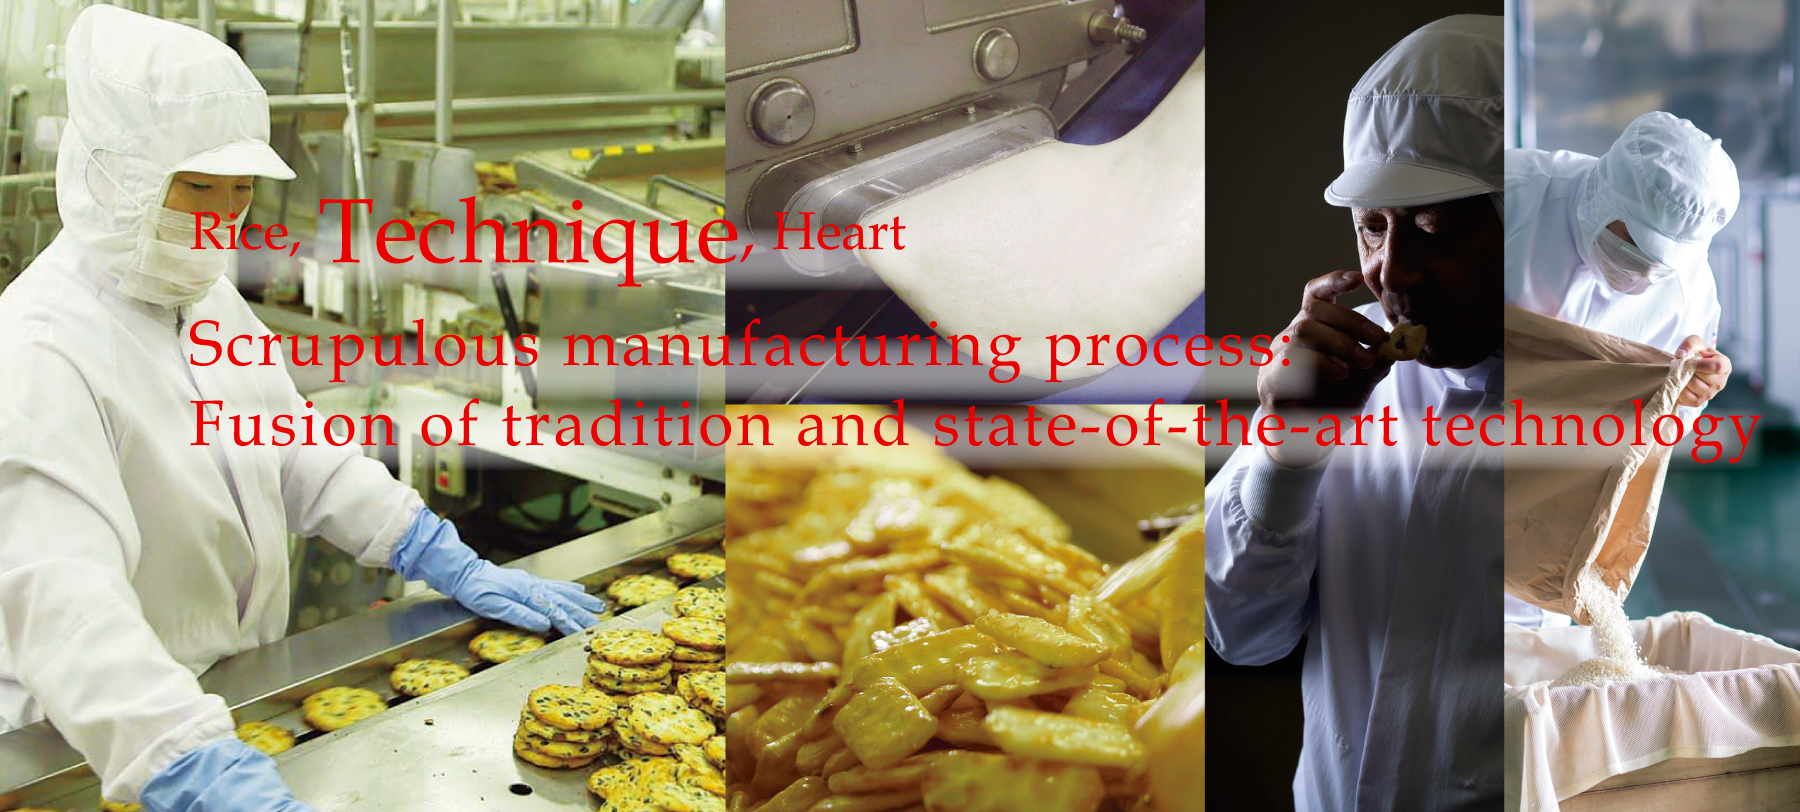 Rice,Technique,Heart Scrupulous manufacturing process: Fusion of tradition and state-of-the-art technology